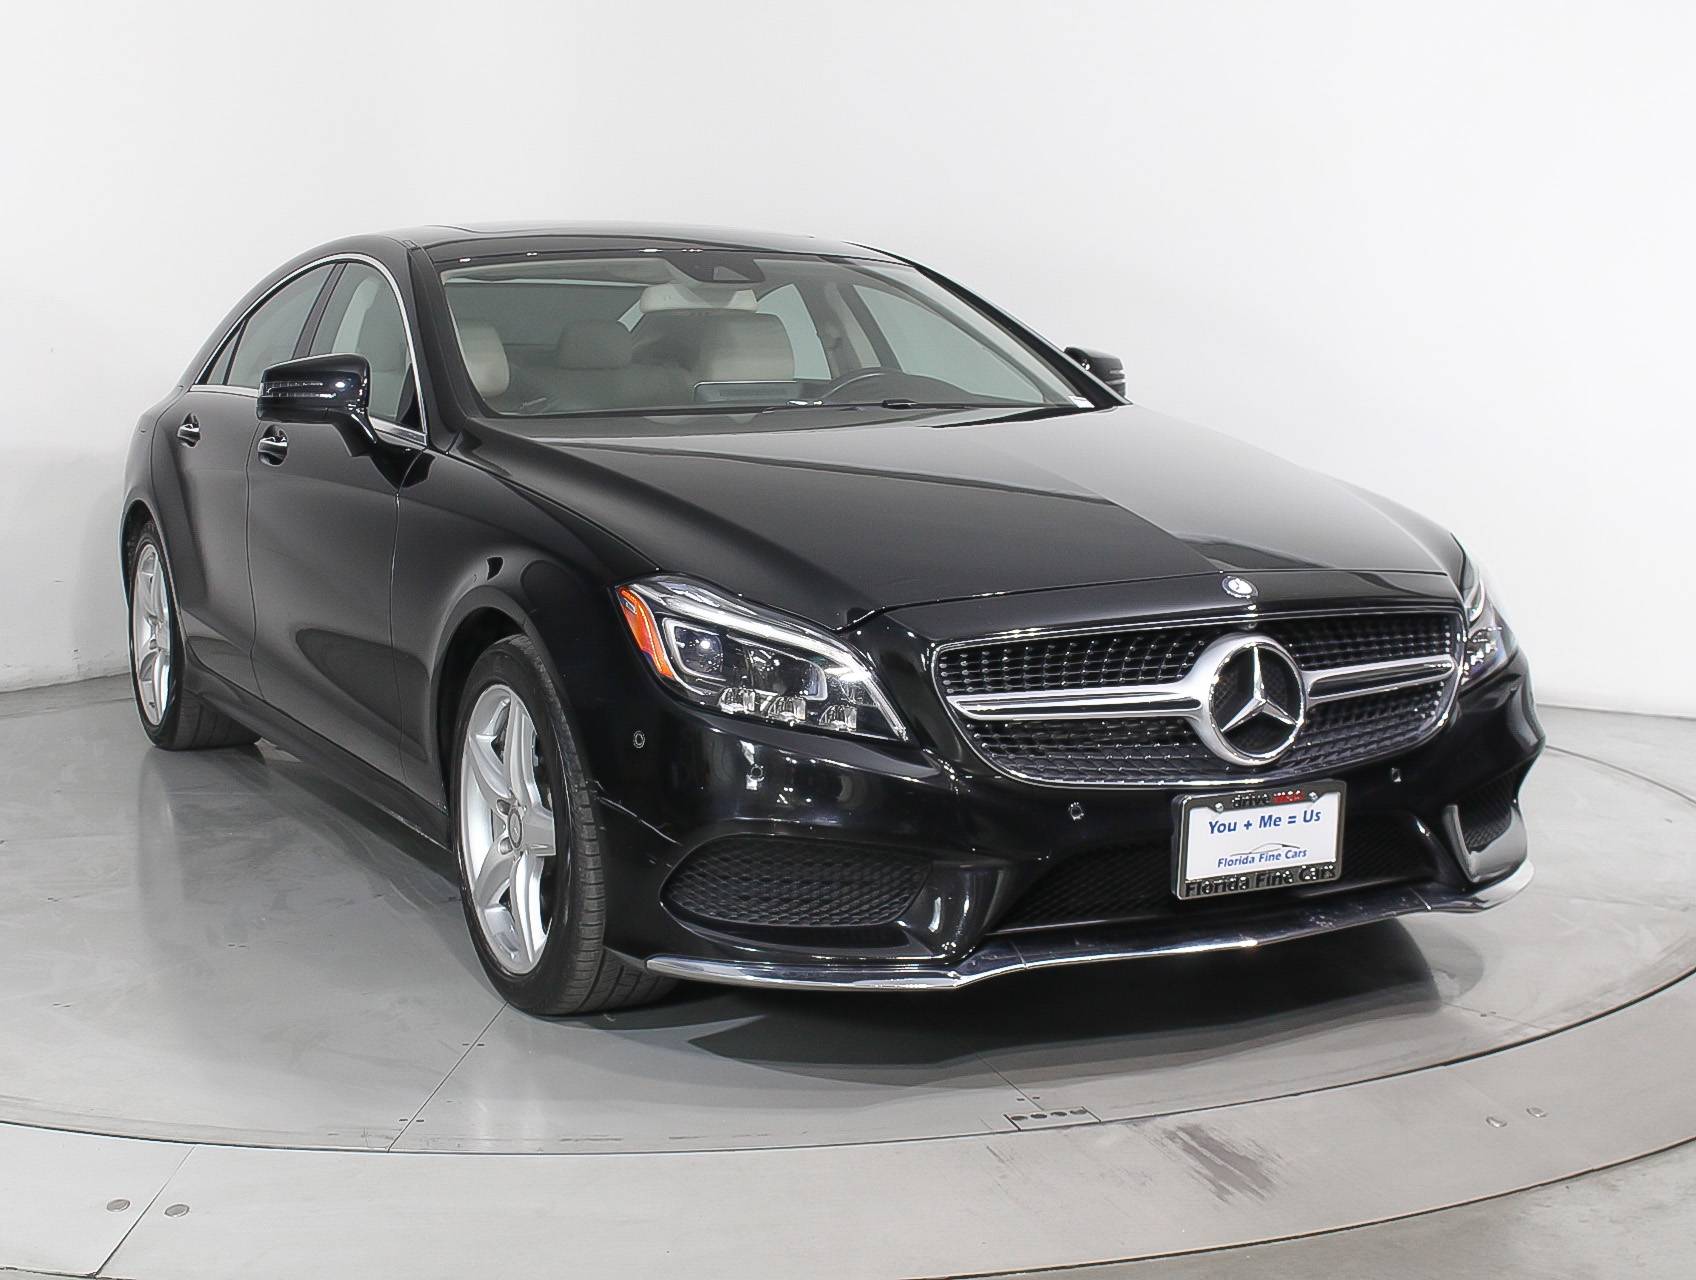 Florida Fine Cars - Used MERCEDES-BENZ CLS CLASS 2015 MIAMI CLS550